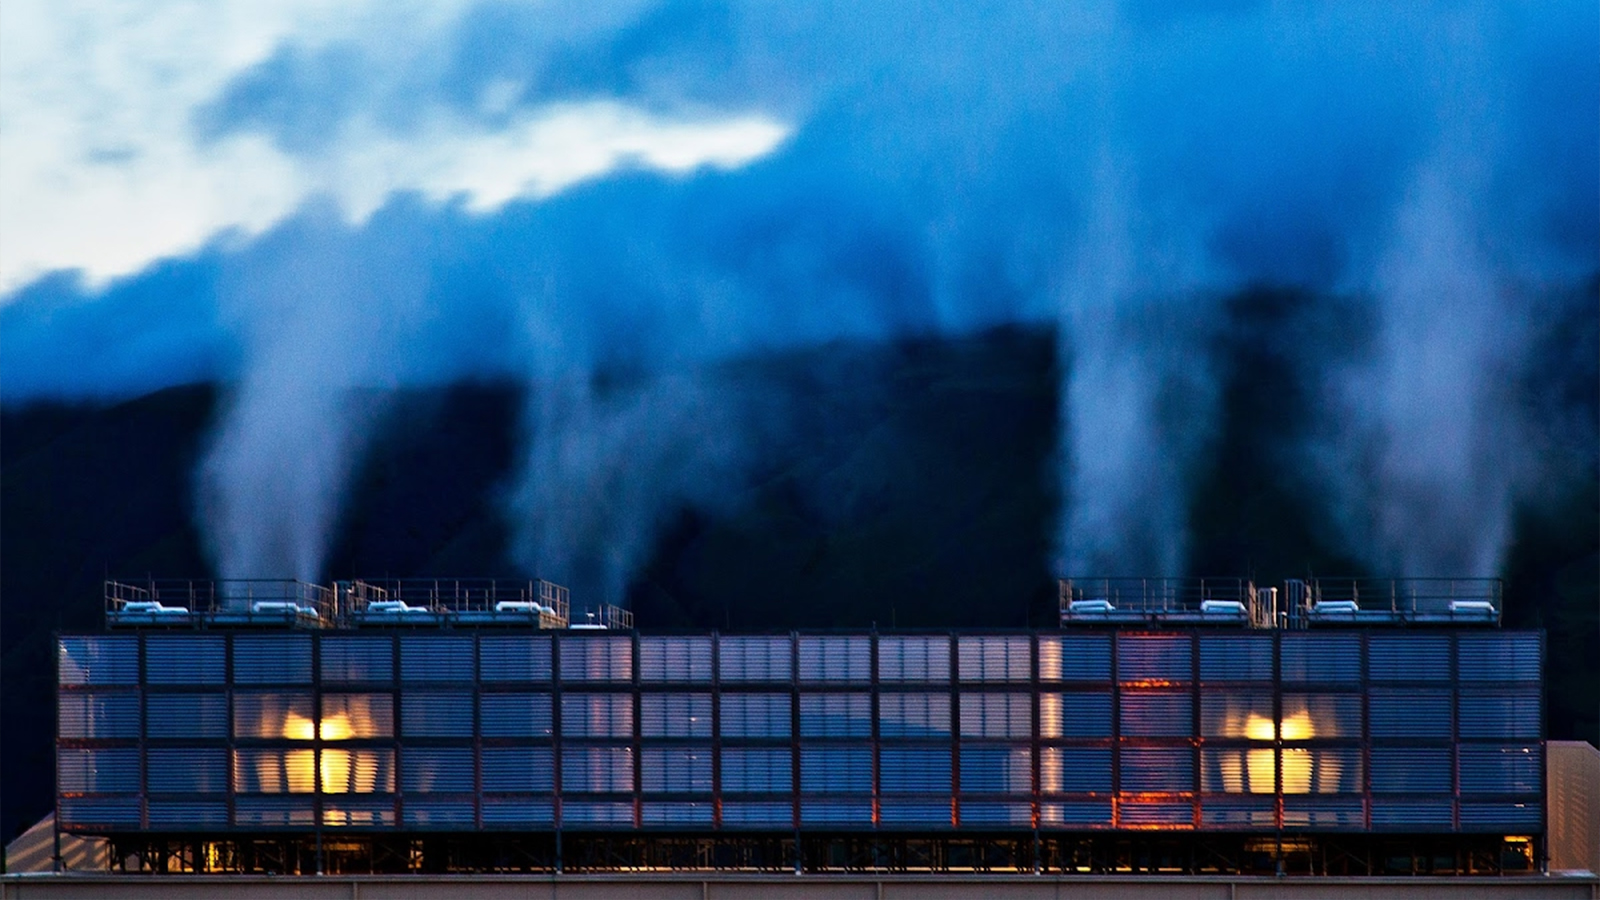 Steam rises above the cooling towers in The Dalles data center in Oregon. These plumes of water vapor create a quiet mist at dusk.